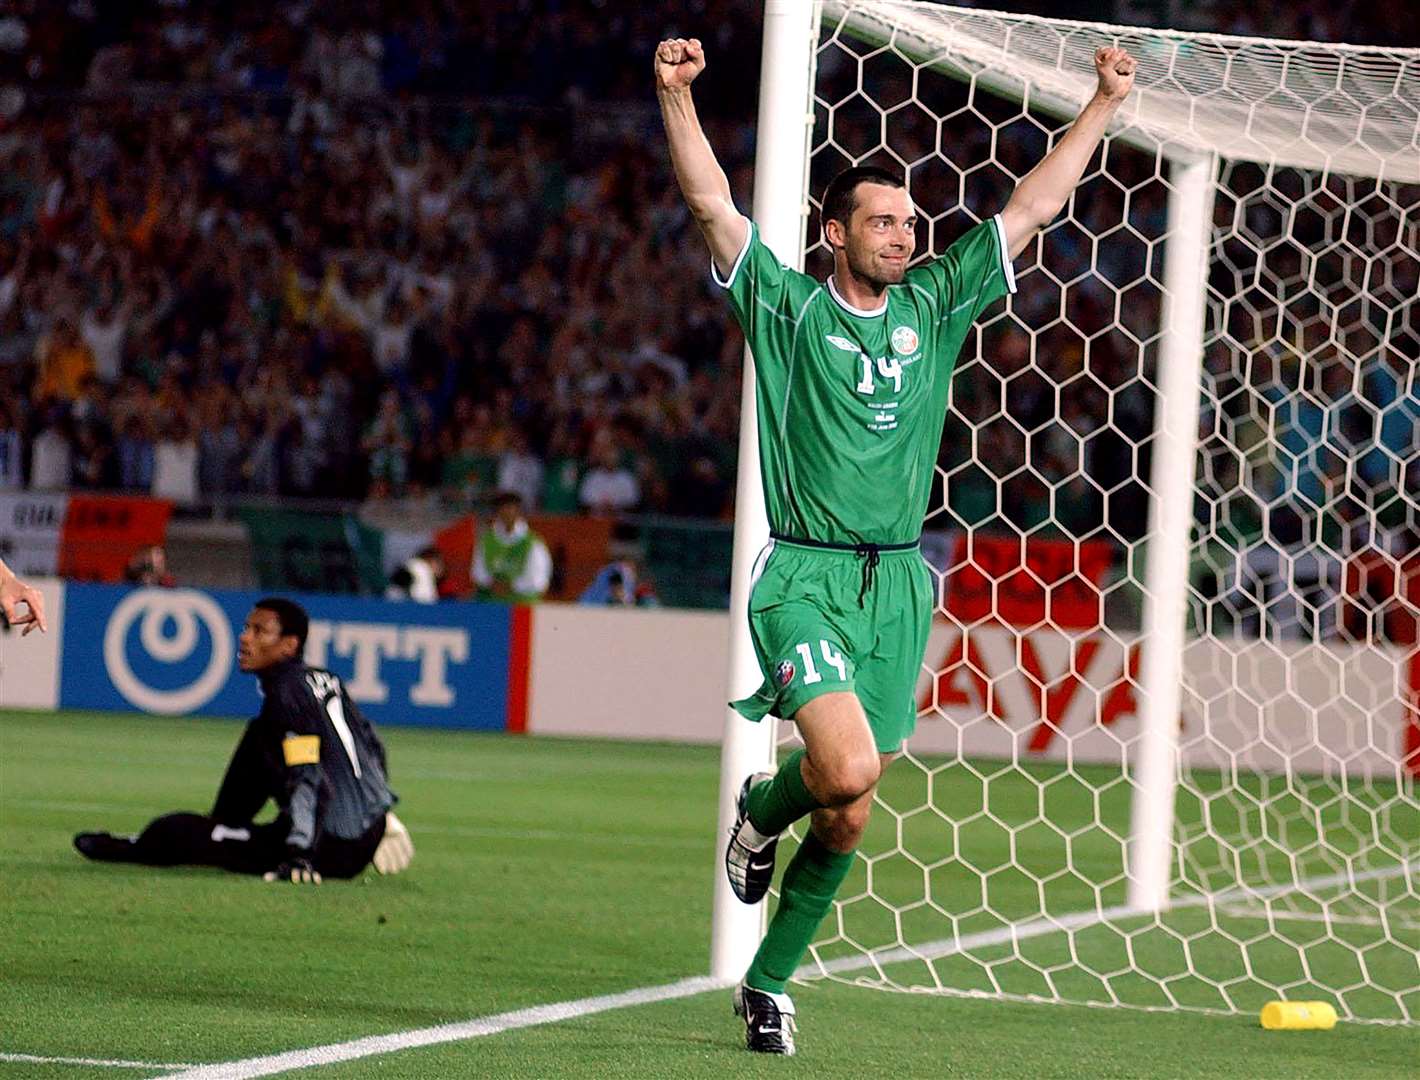 Gary Breen celebrates after scoring Ireland's second goal against Saudi Arabia during the 2002 World Cup. Picture: PA Images